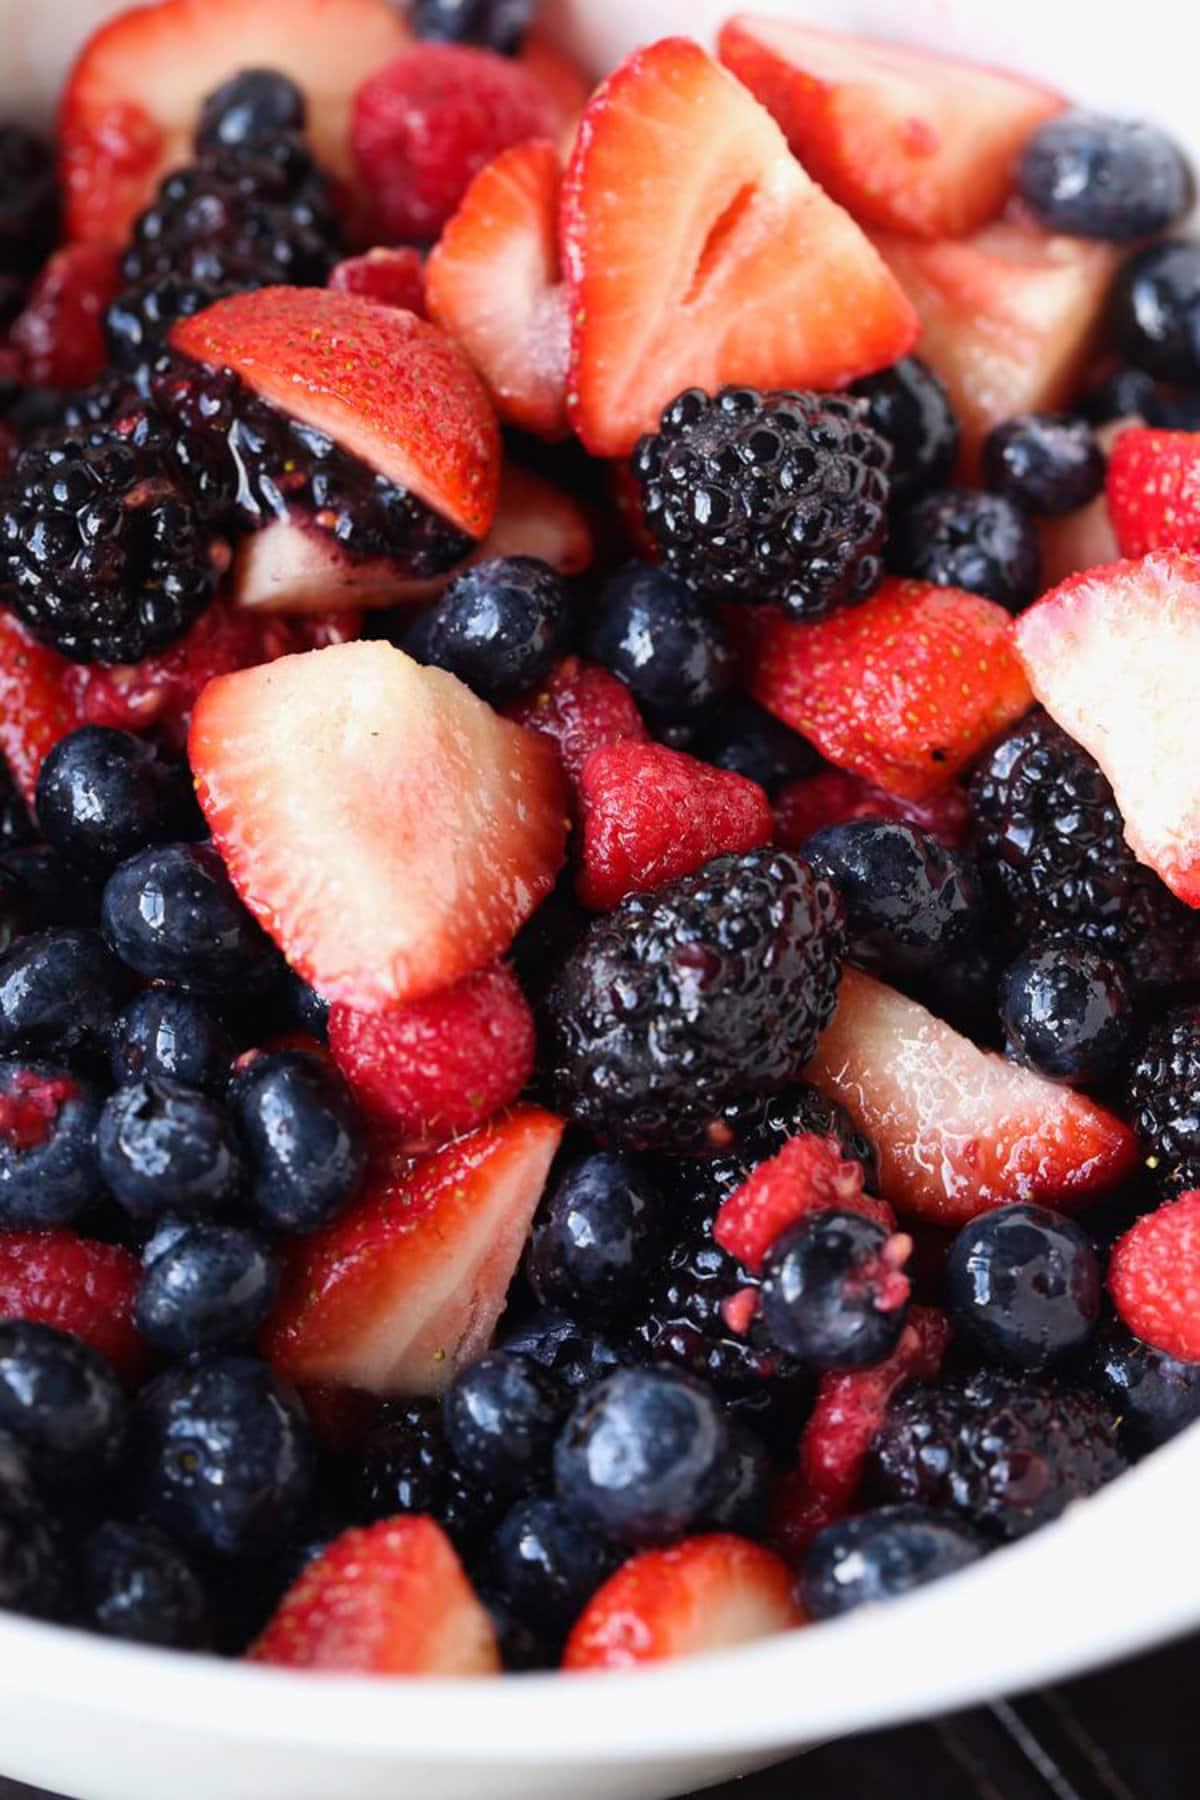 Fruits and berries in a bowl